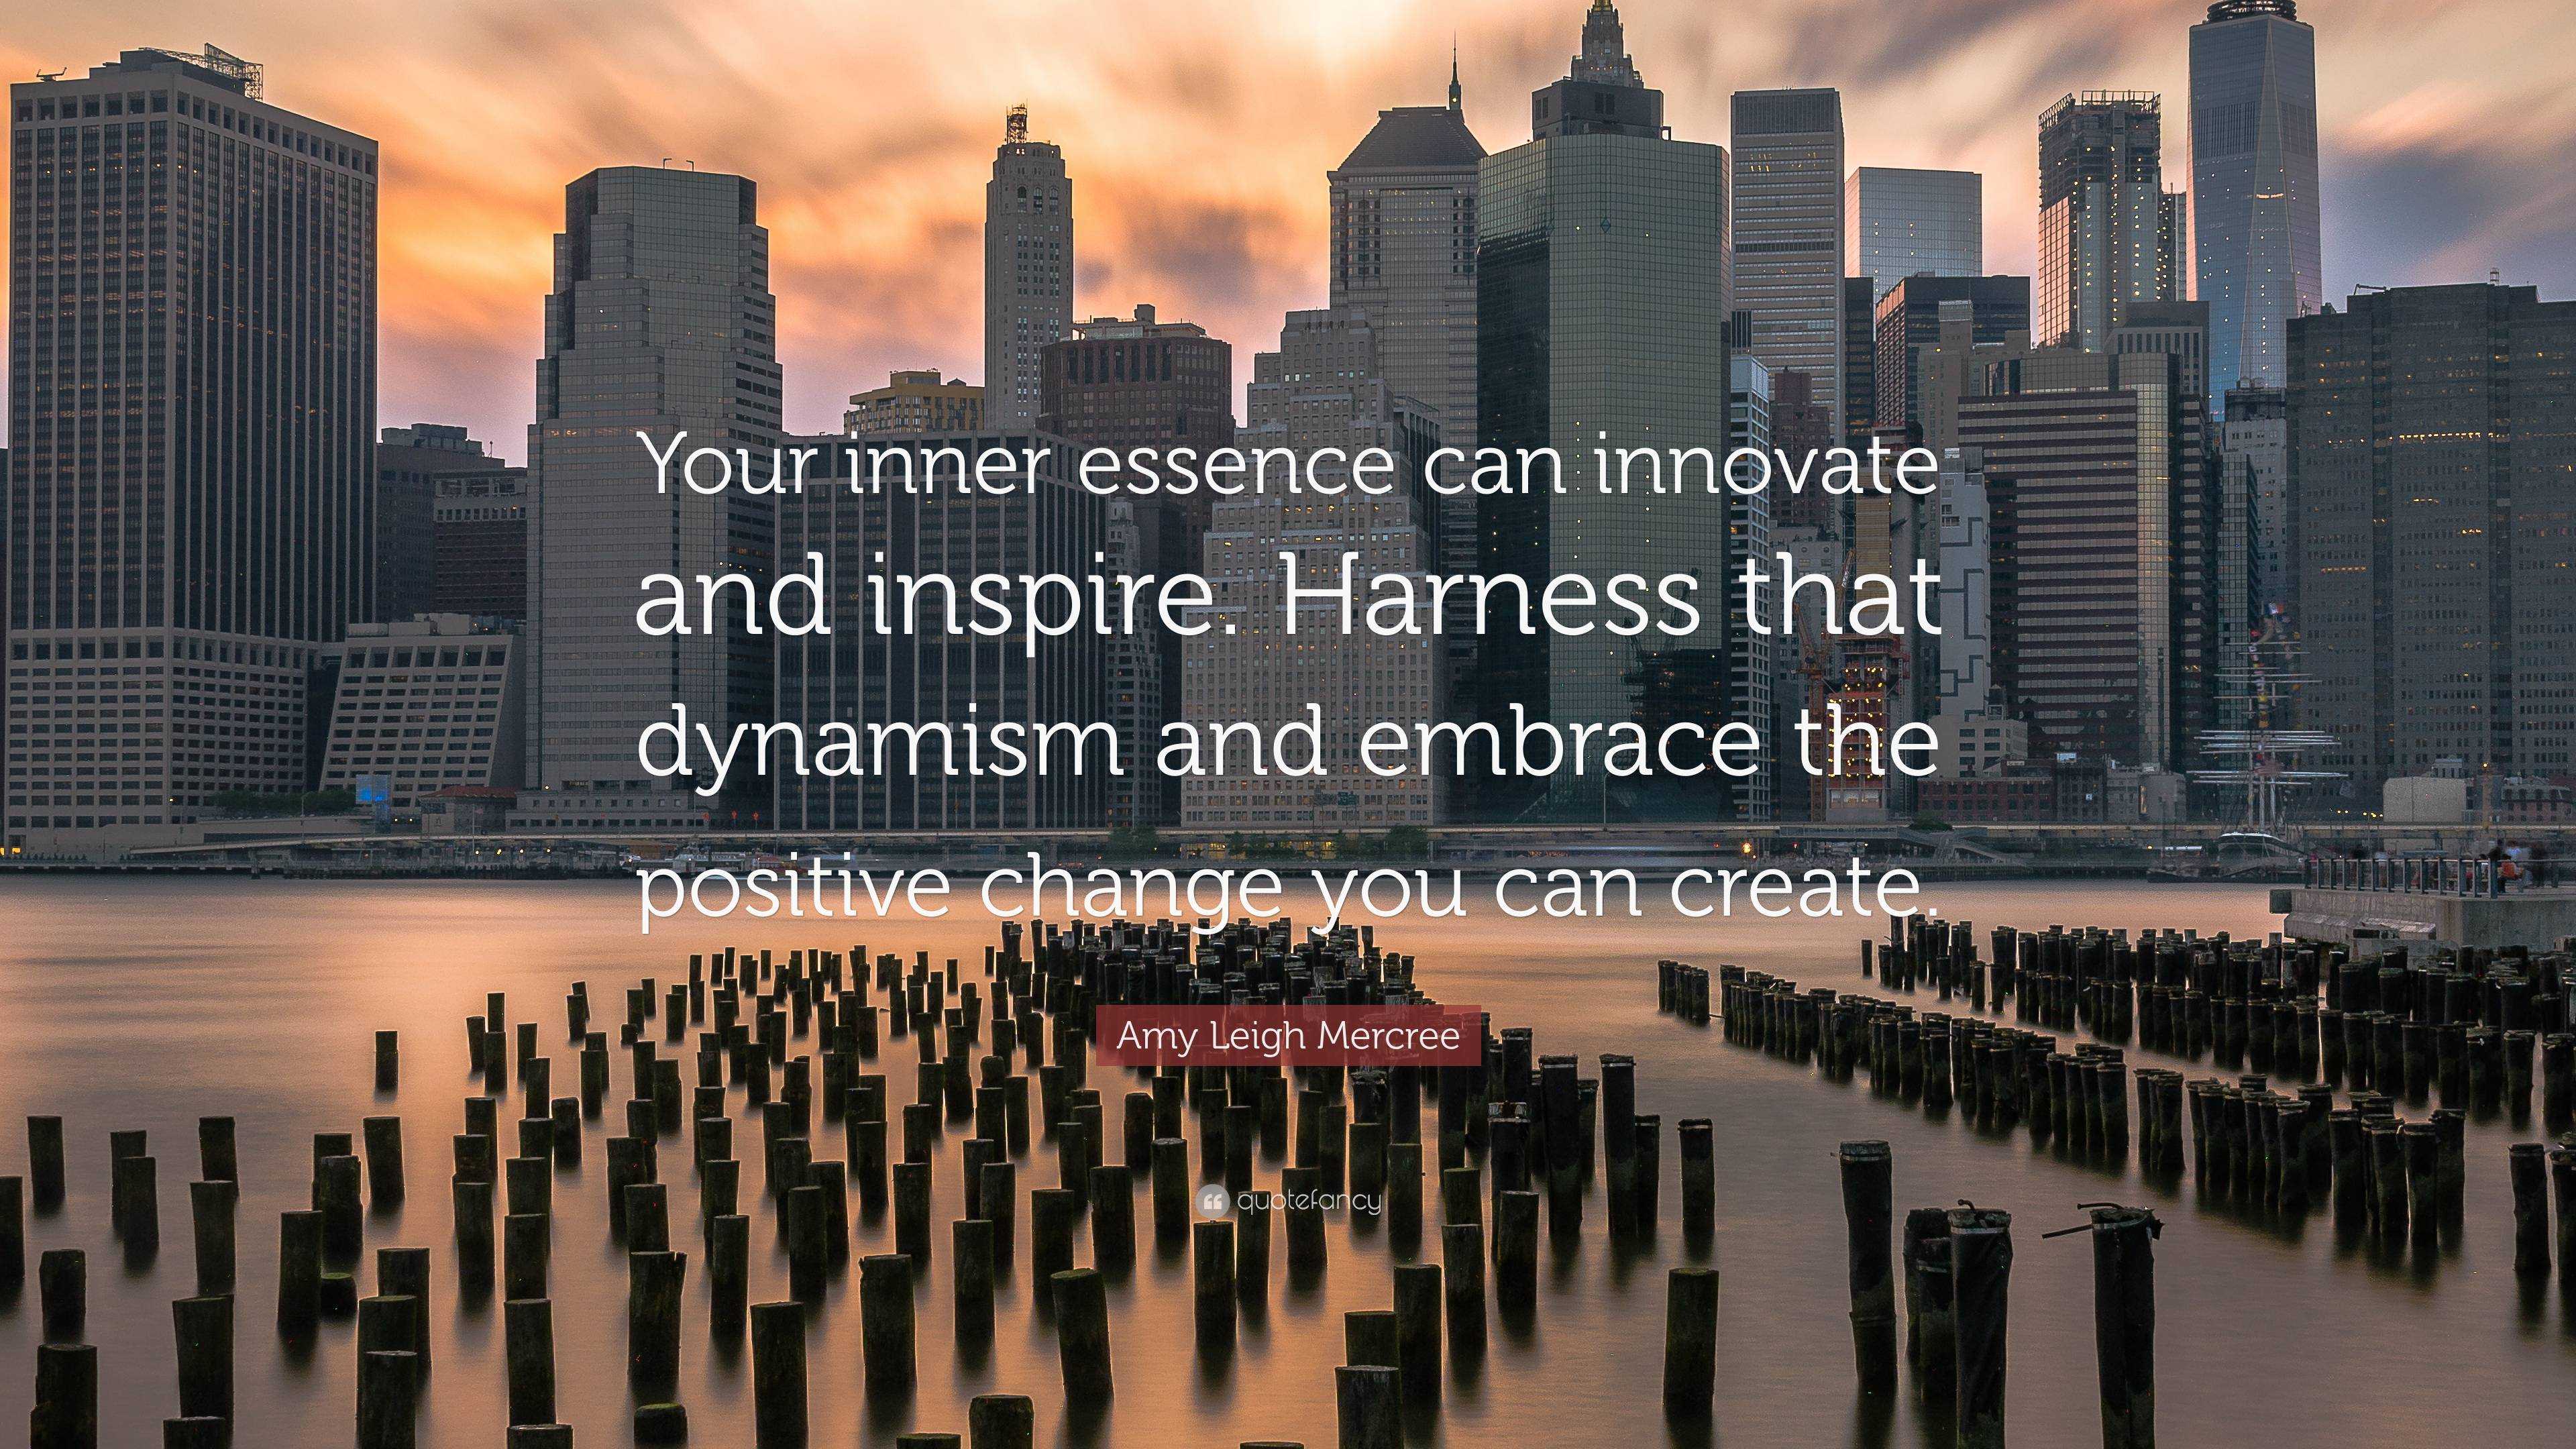 https://quotefancy.com/media/wallpaper/3840x2160/6971340-Amy-Leigh-Mercree-Quote-Your-inner-essence-can-innovate-and.jpg